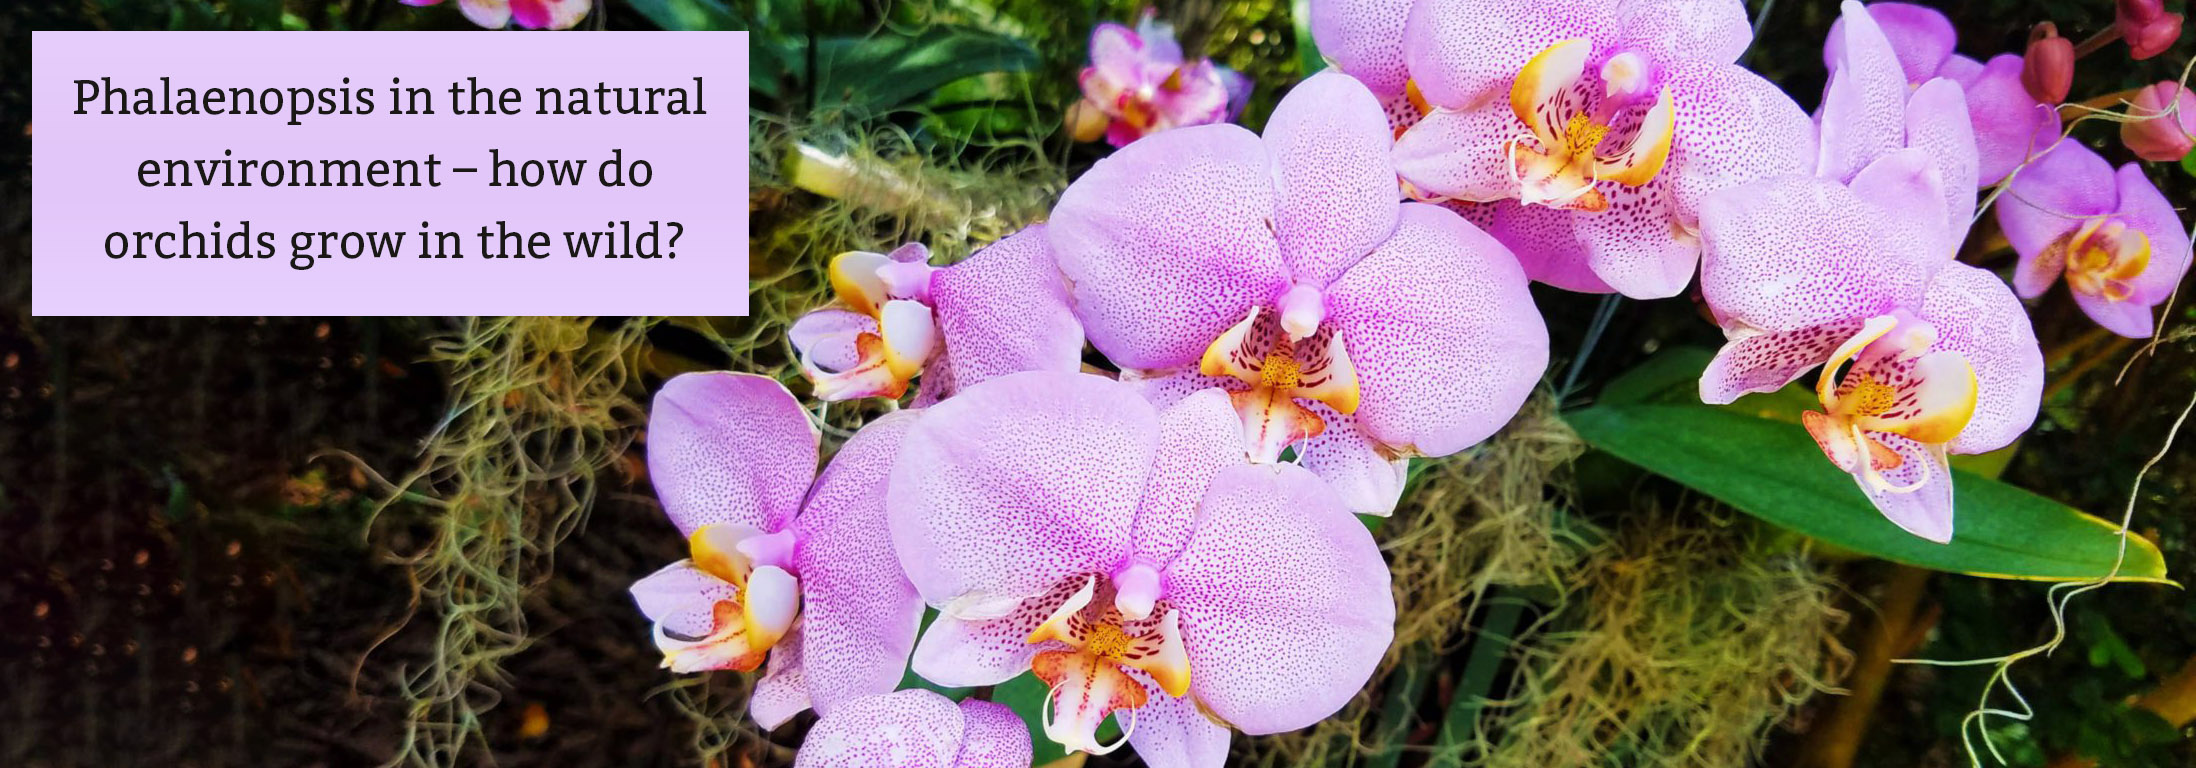 Phalaenopsis in the natural environment – how do orchids grow in the wild